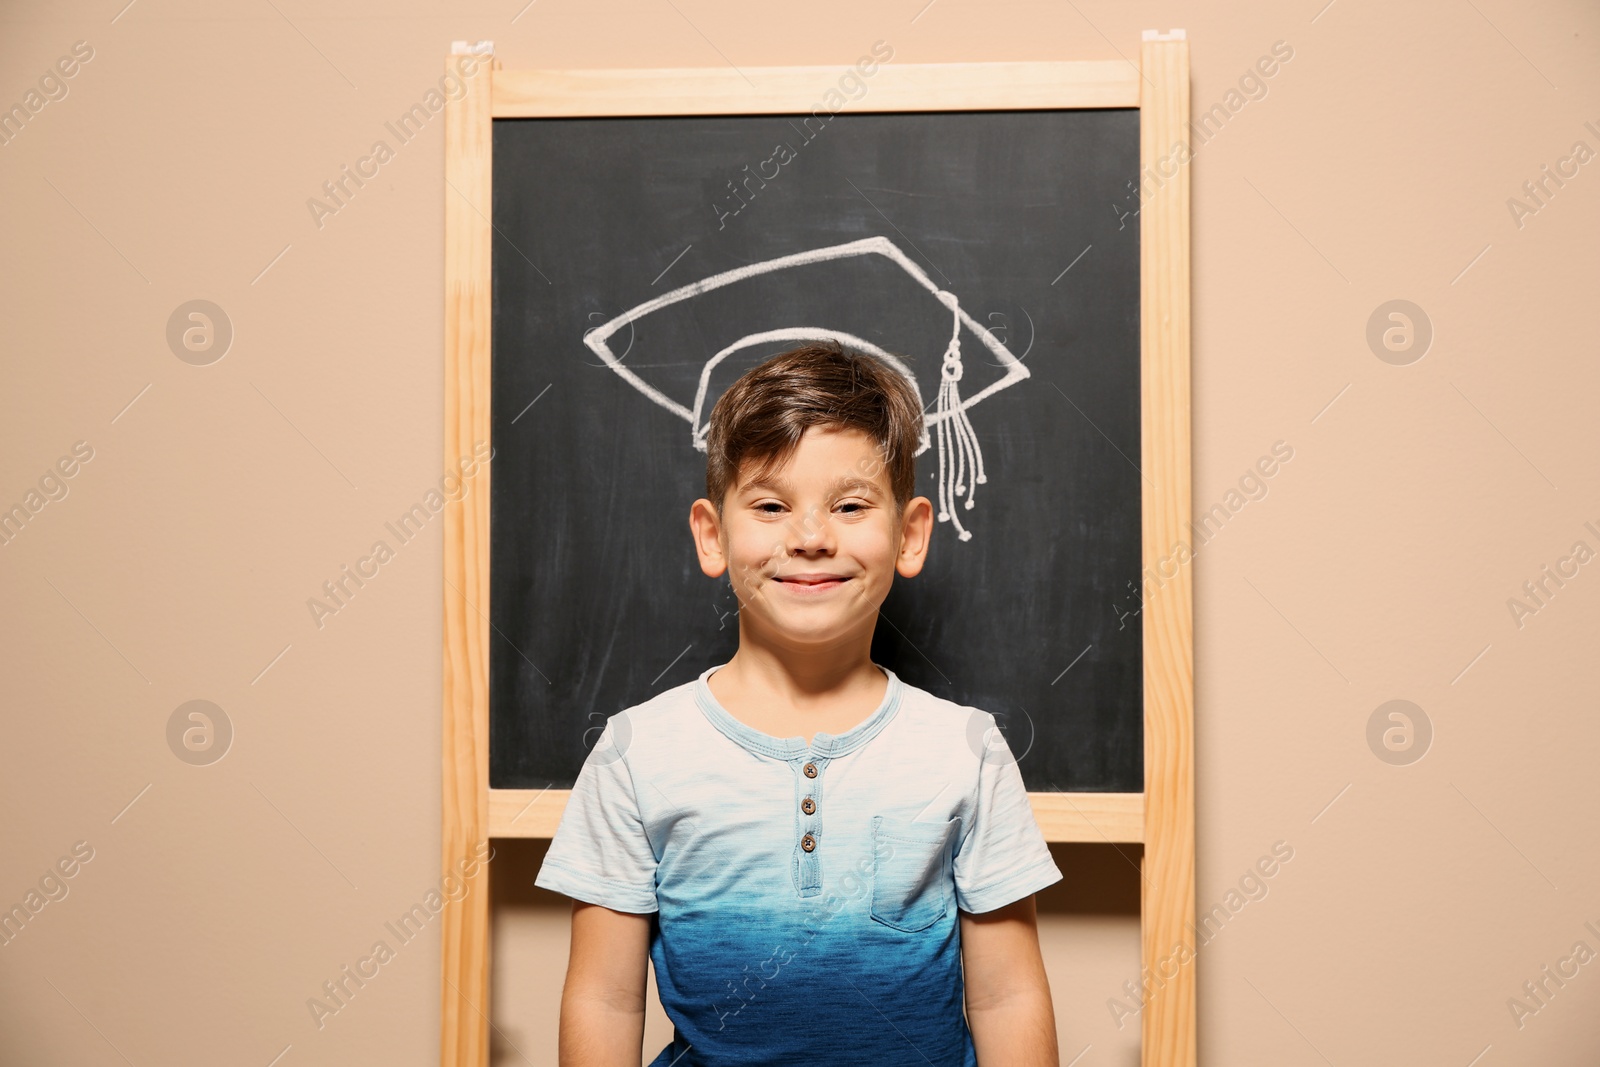 Photo of Cute little child standing at blackboard with chalk drawn academic cap. Education concept